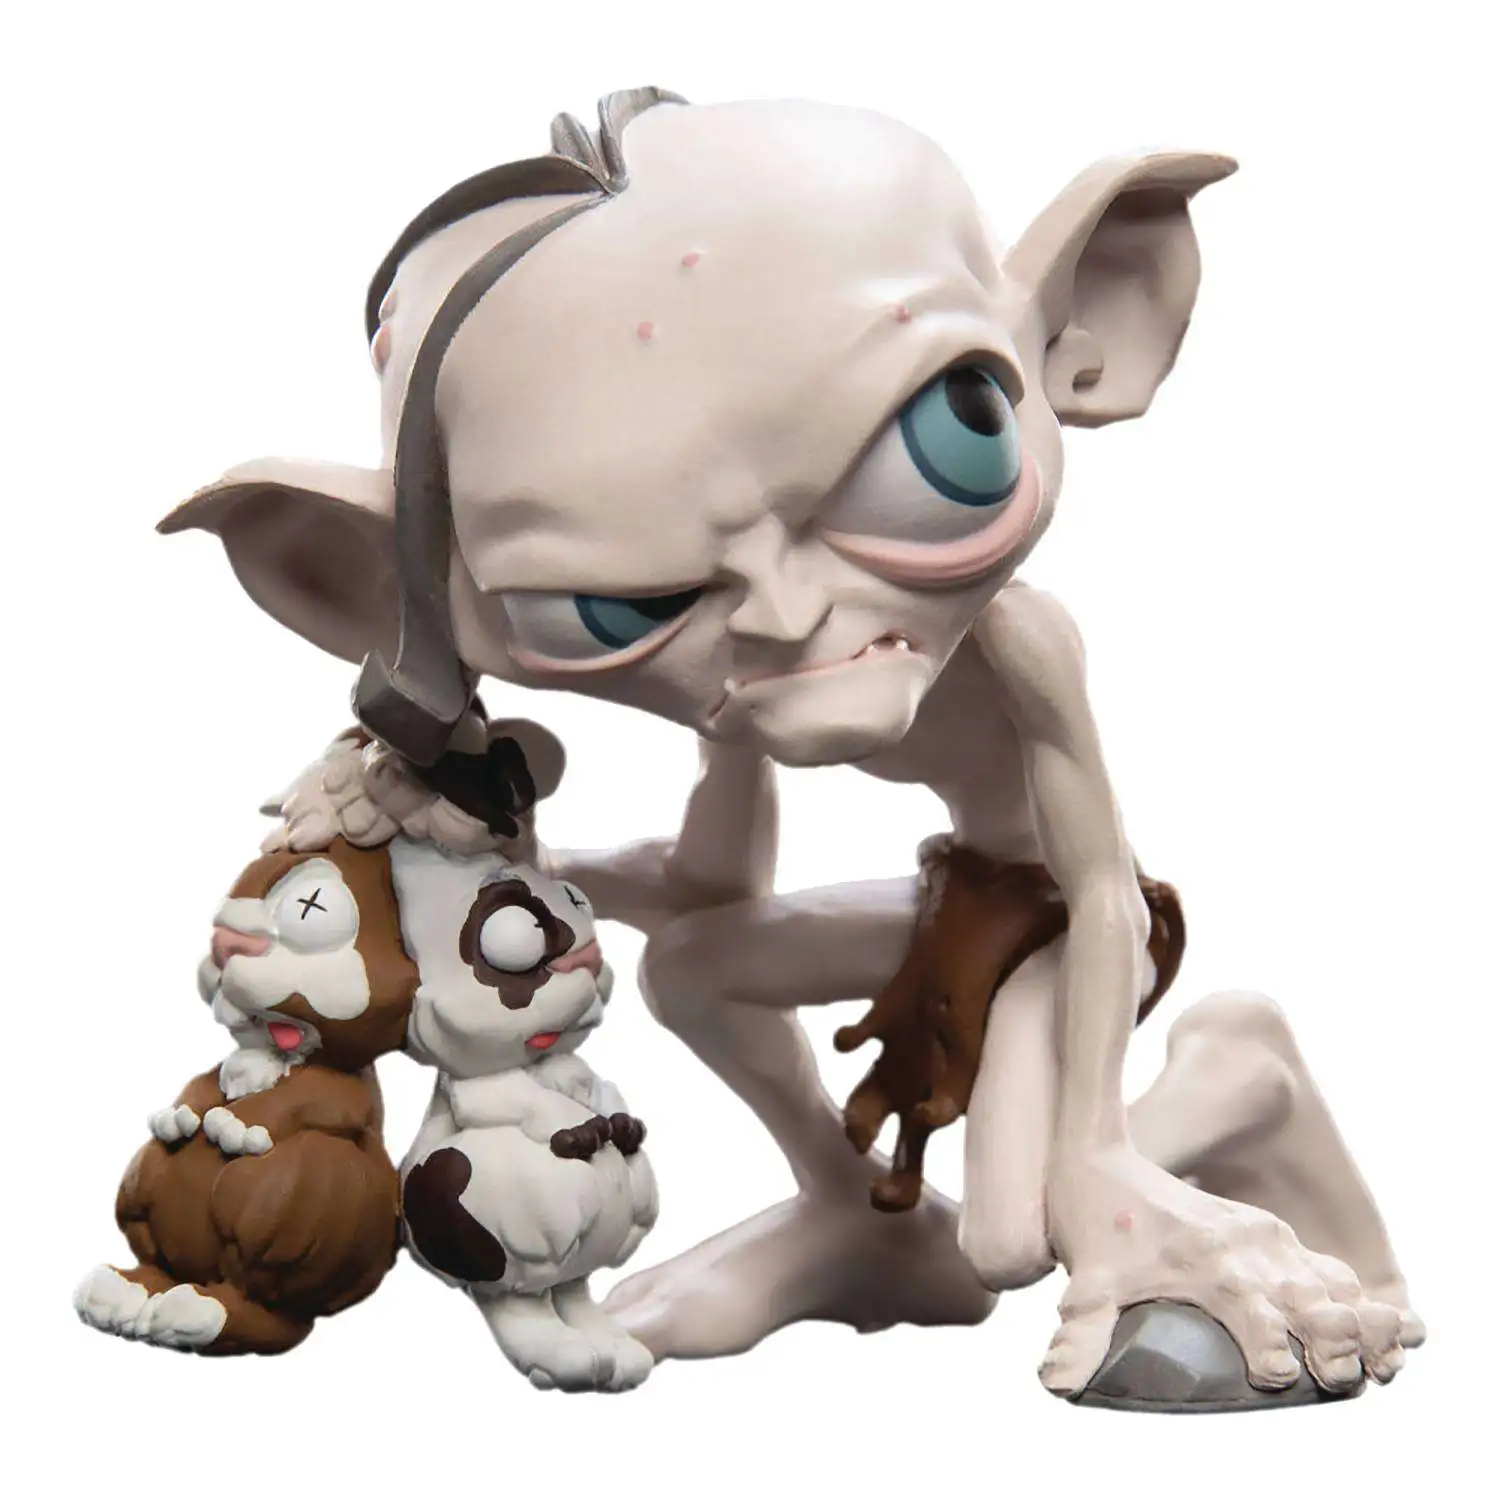 In Stock Gollum Details about   Weta Workshop Mini Epics #2 Lord of the Rings Vinyl Figure 